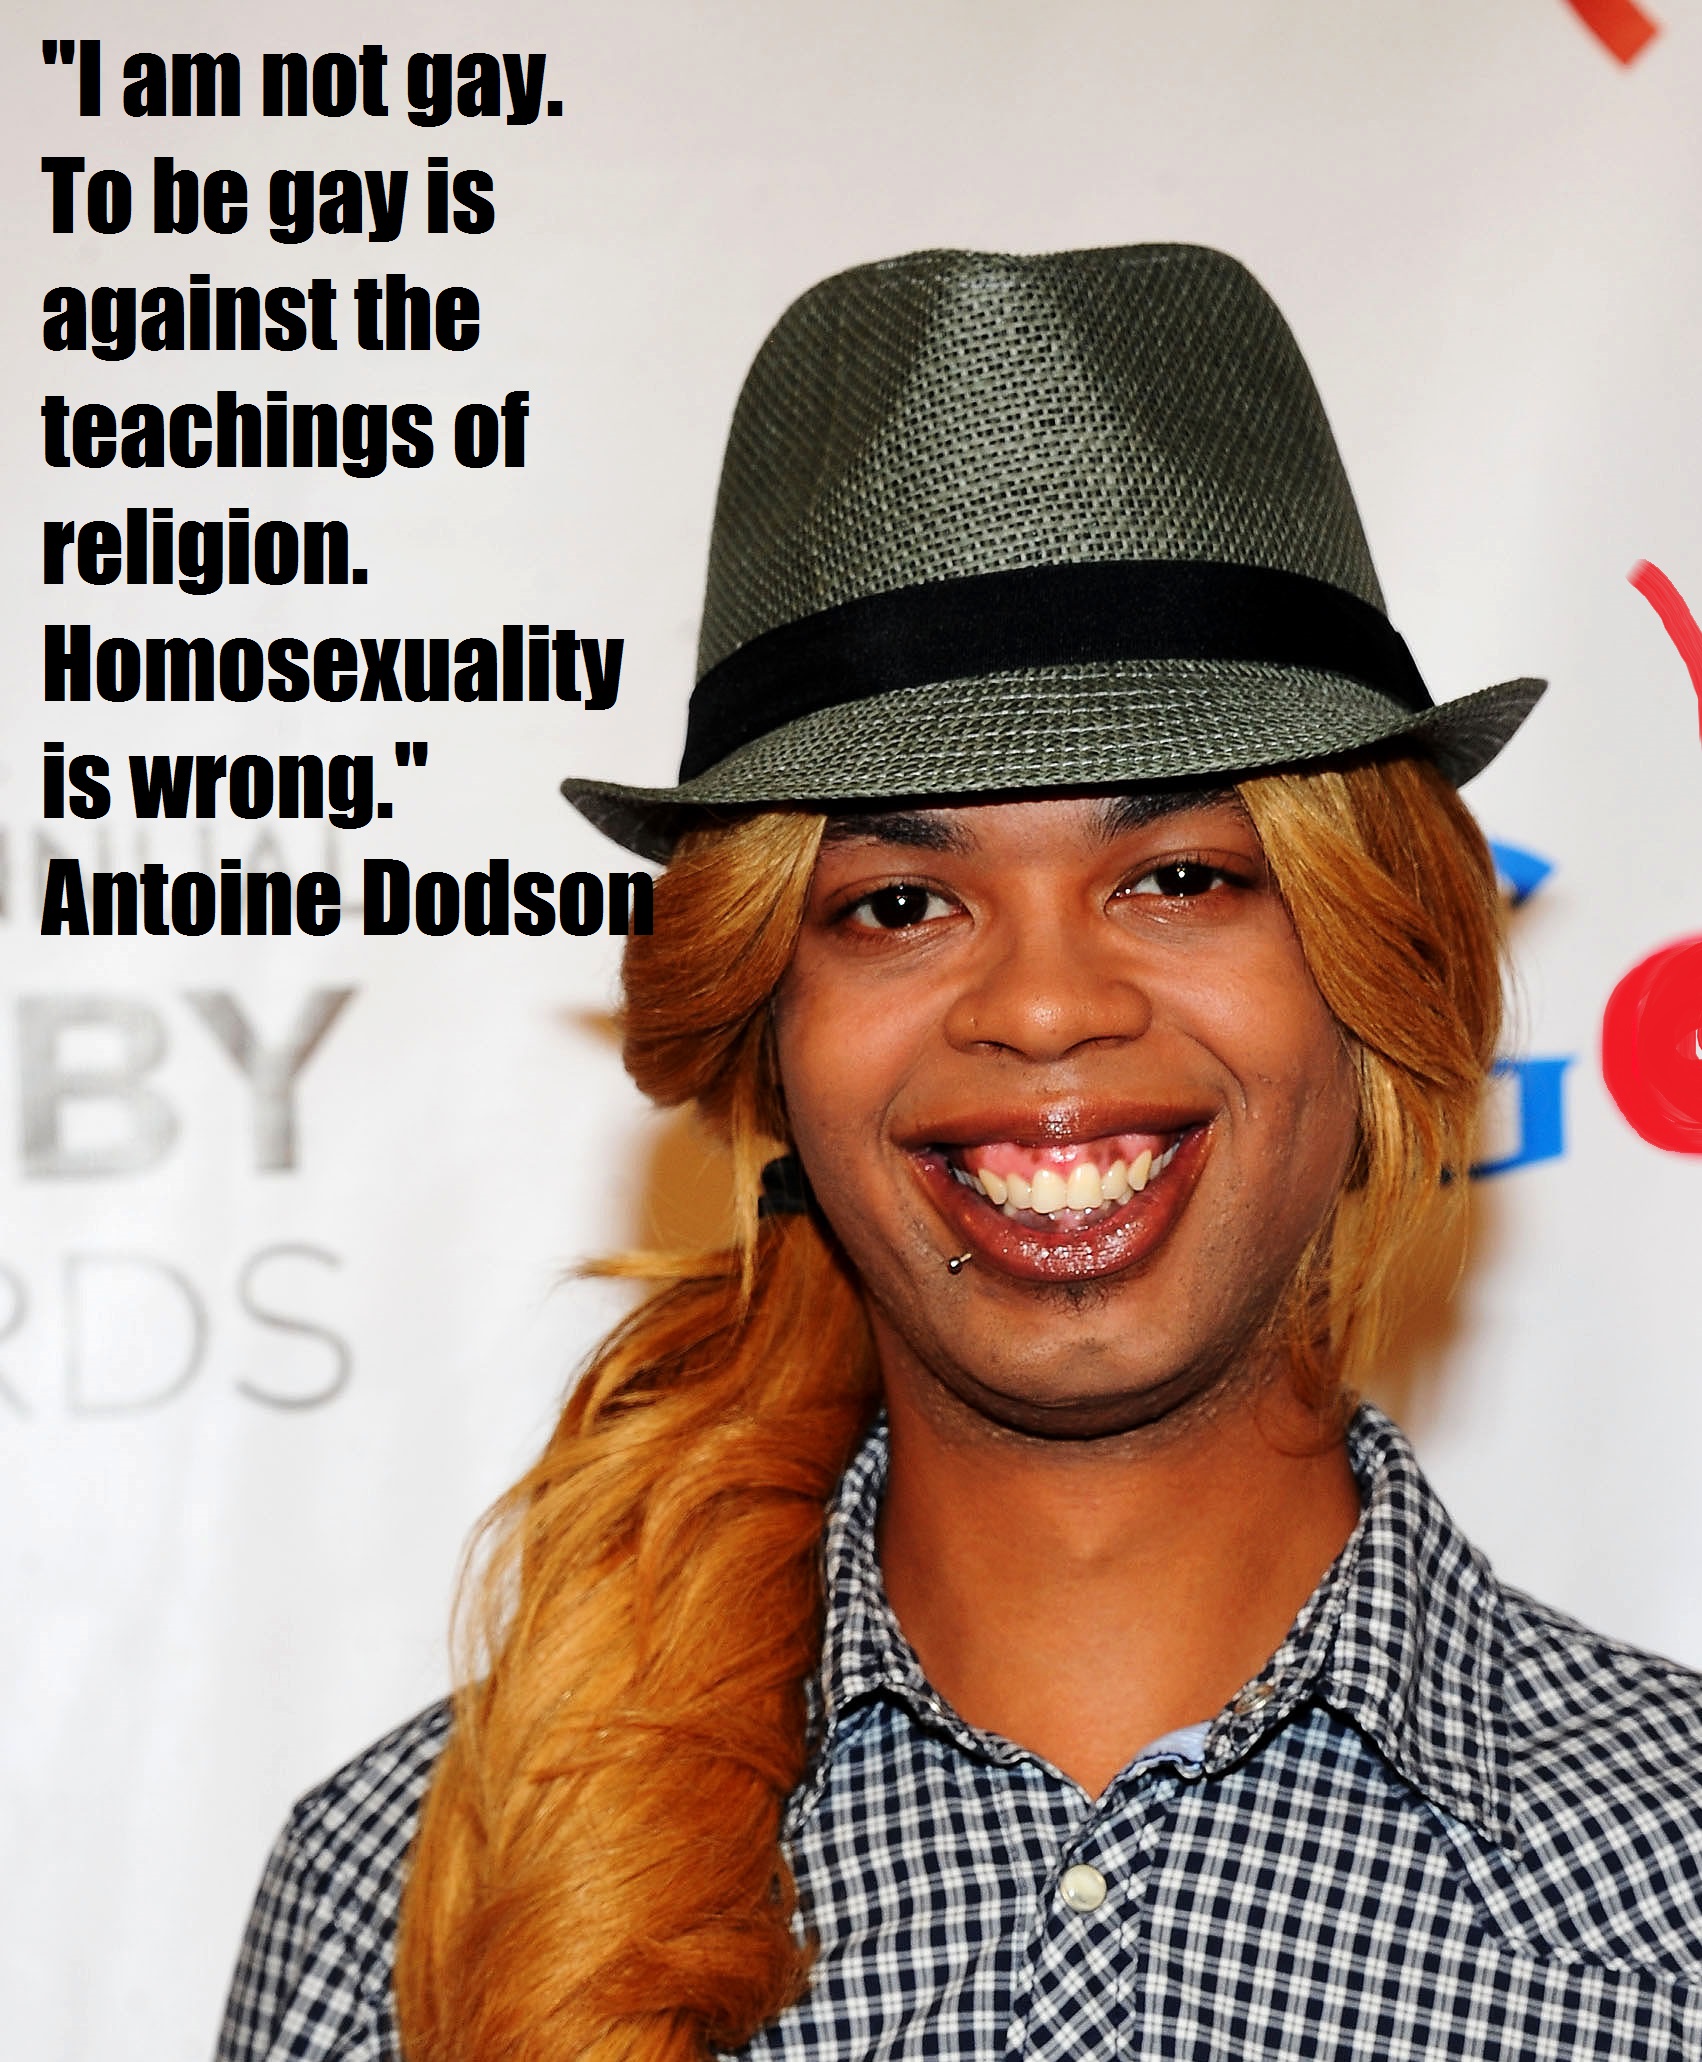 Antoine Dodson No Longer Gay but LGBT Community Doesn’t Know It.